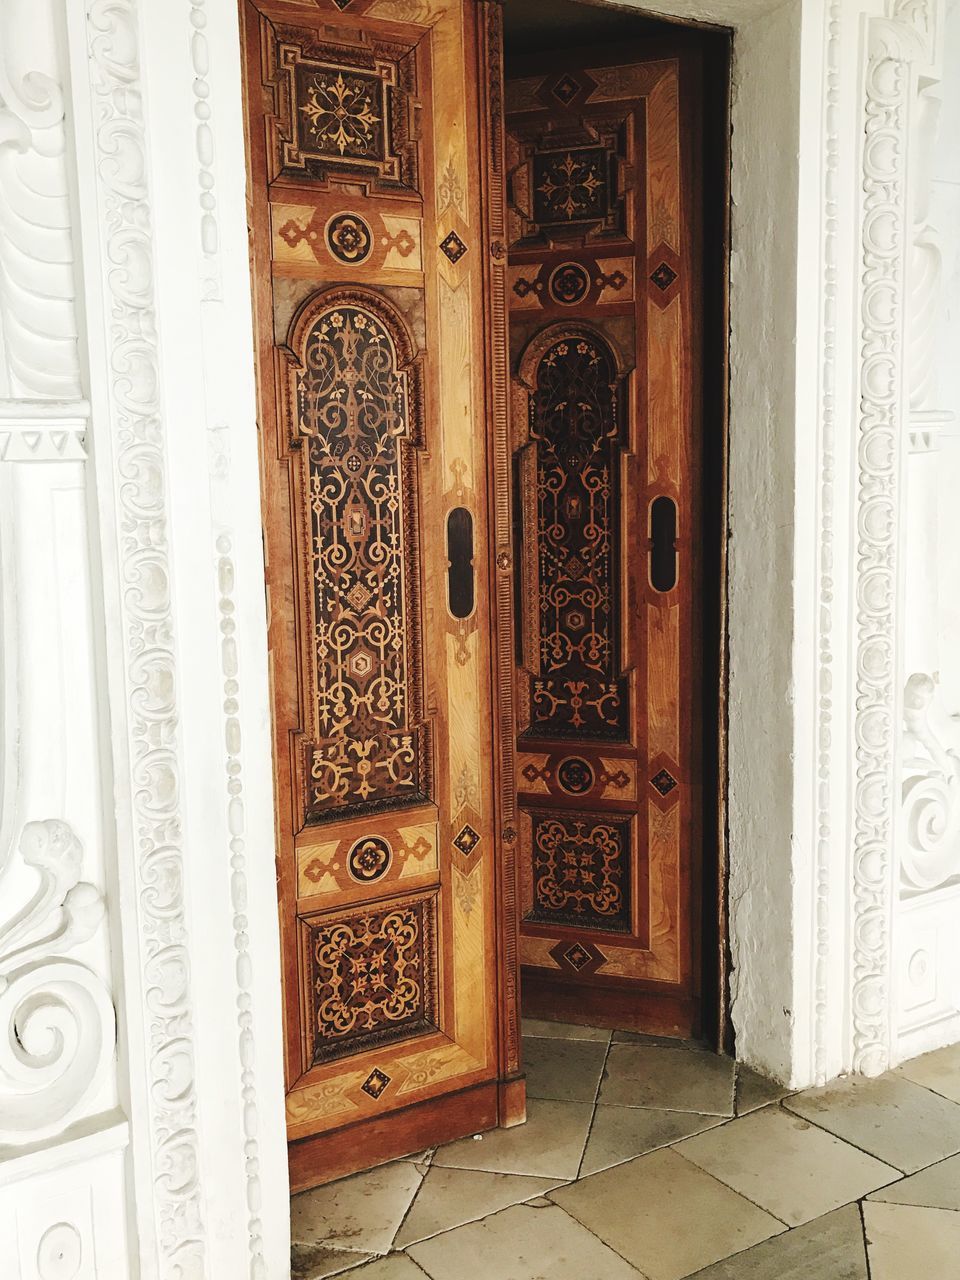 entrance, door, architecture, built structure, building, indoors, pattern, no people, design, closed, day, creativity, house, home interior, open, art and craft, doorway, front door, ornate, floral pattern